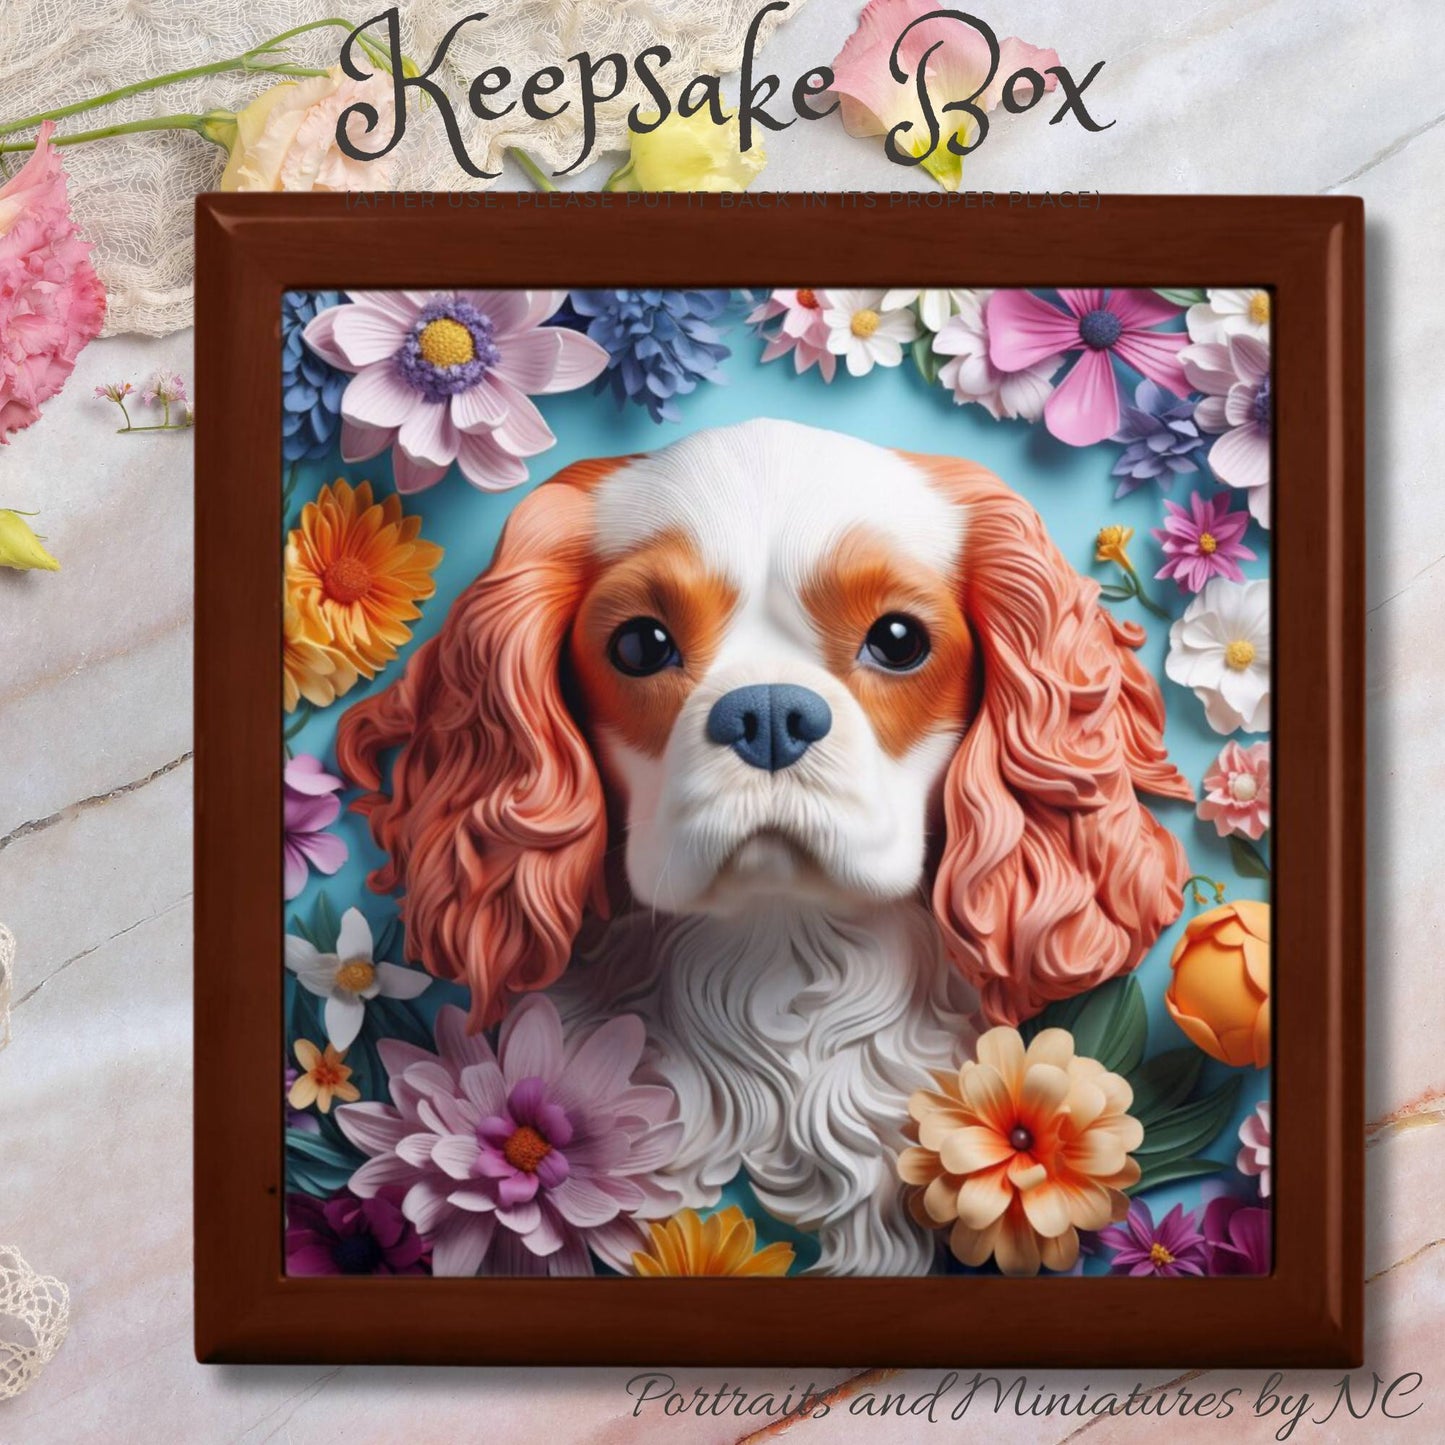 Lacquered Wood Keepsake/Jewelry Box - King Charles Spaniel on table